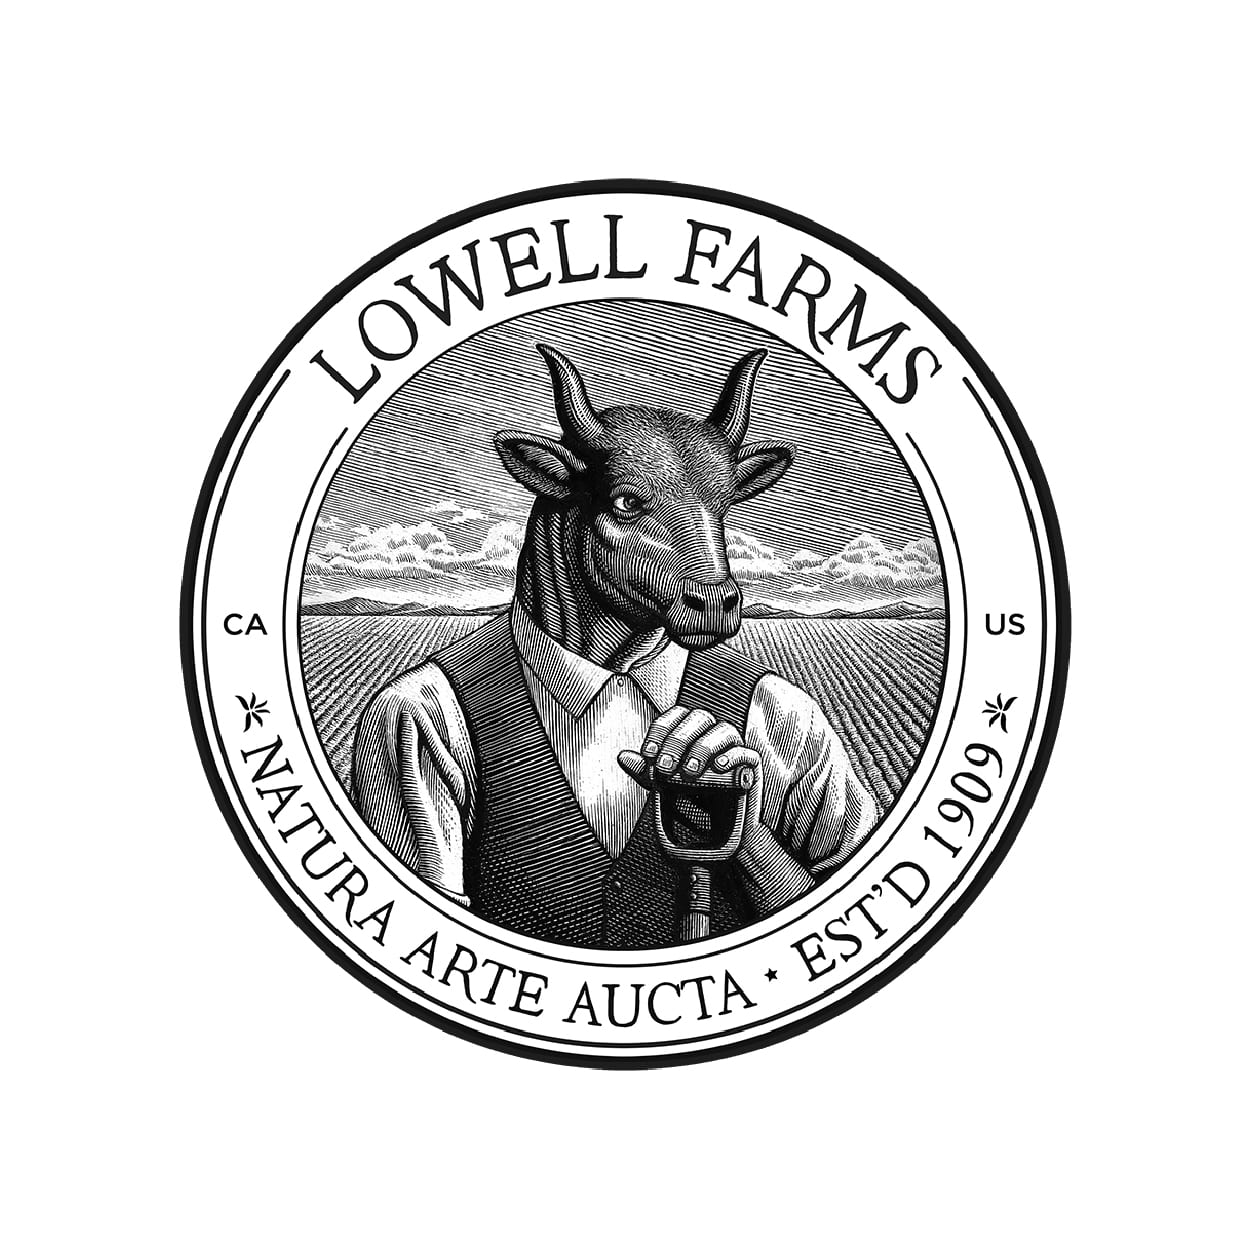 Lowell Farms weed shop deals